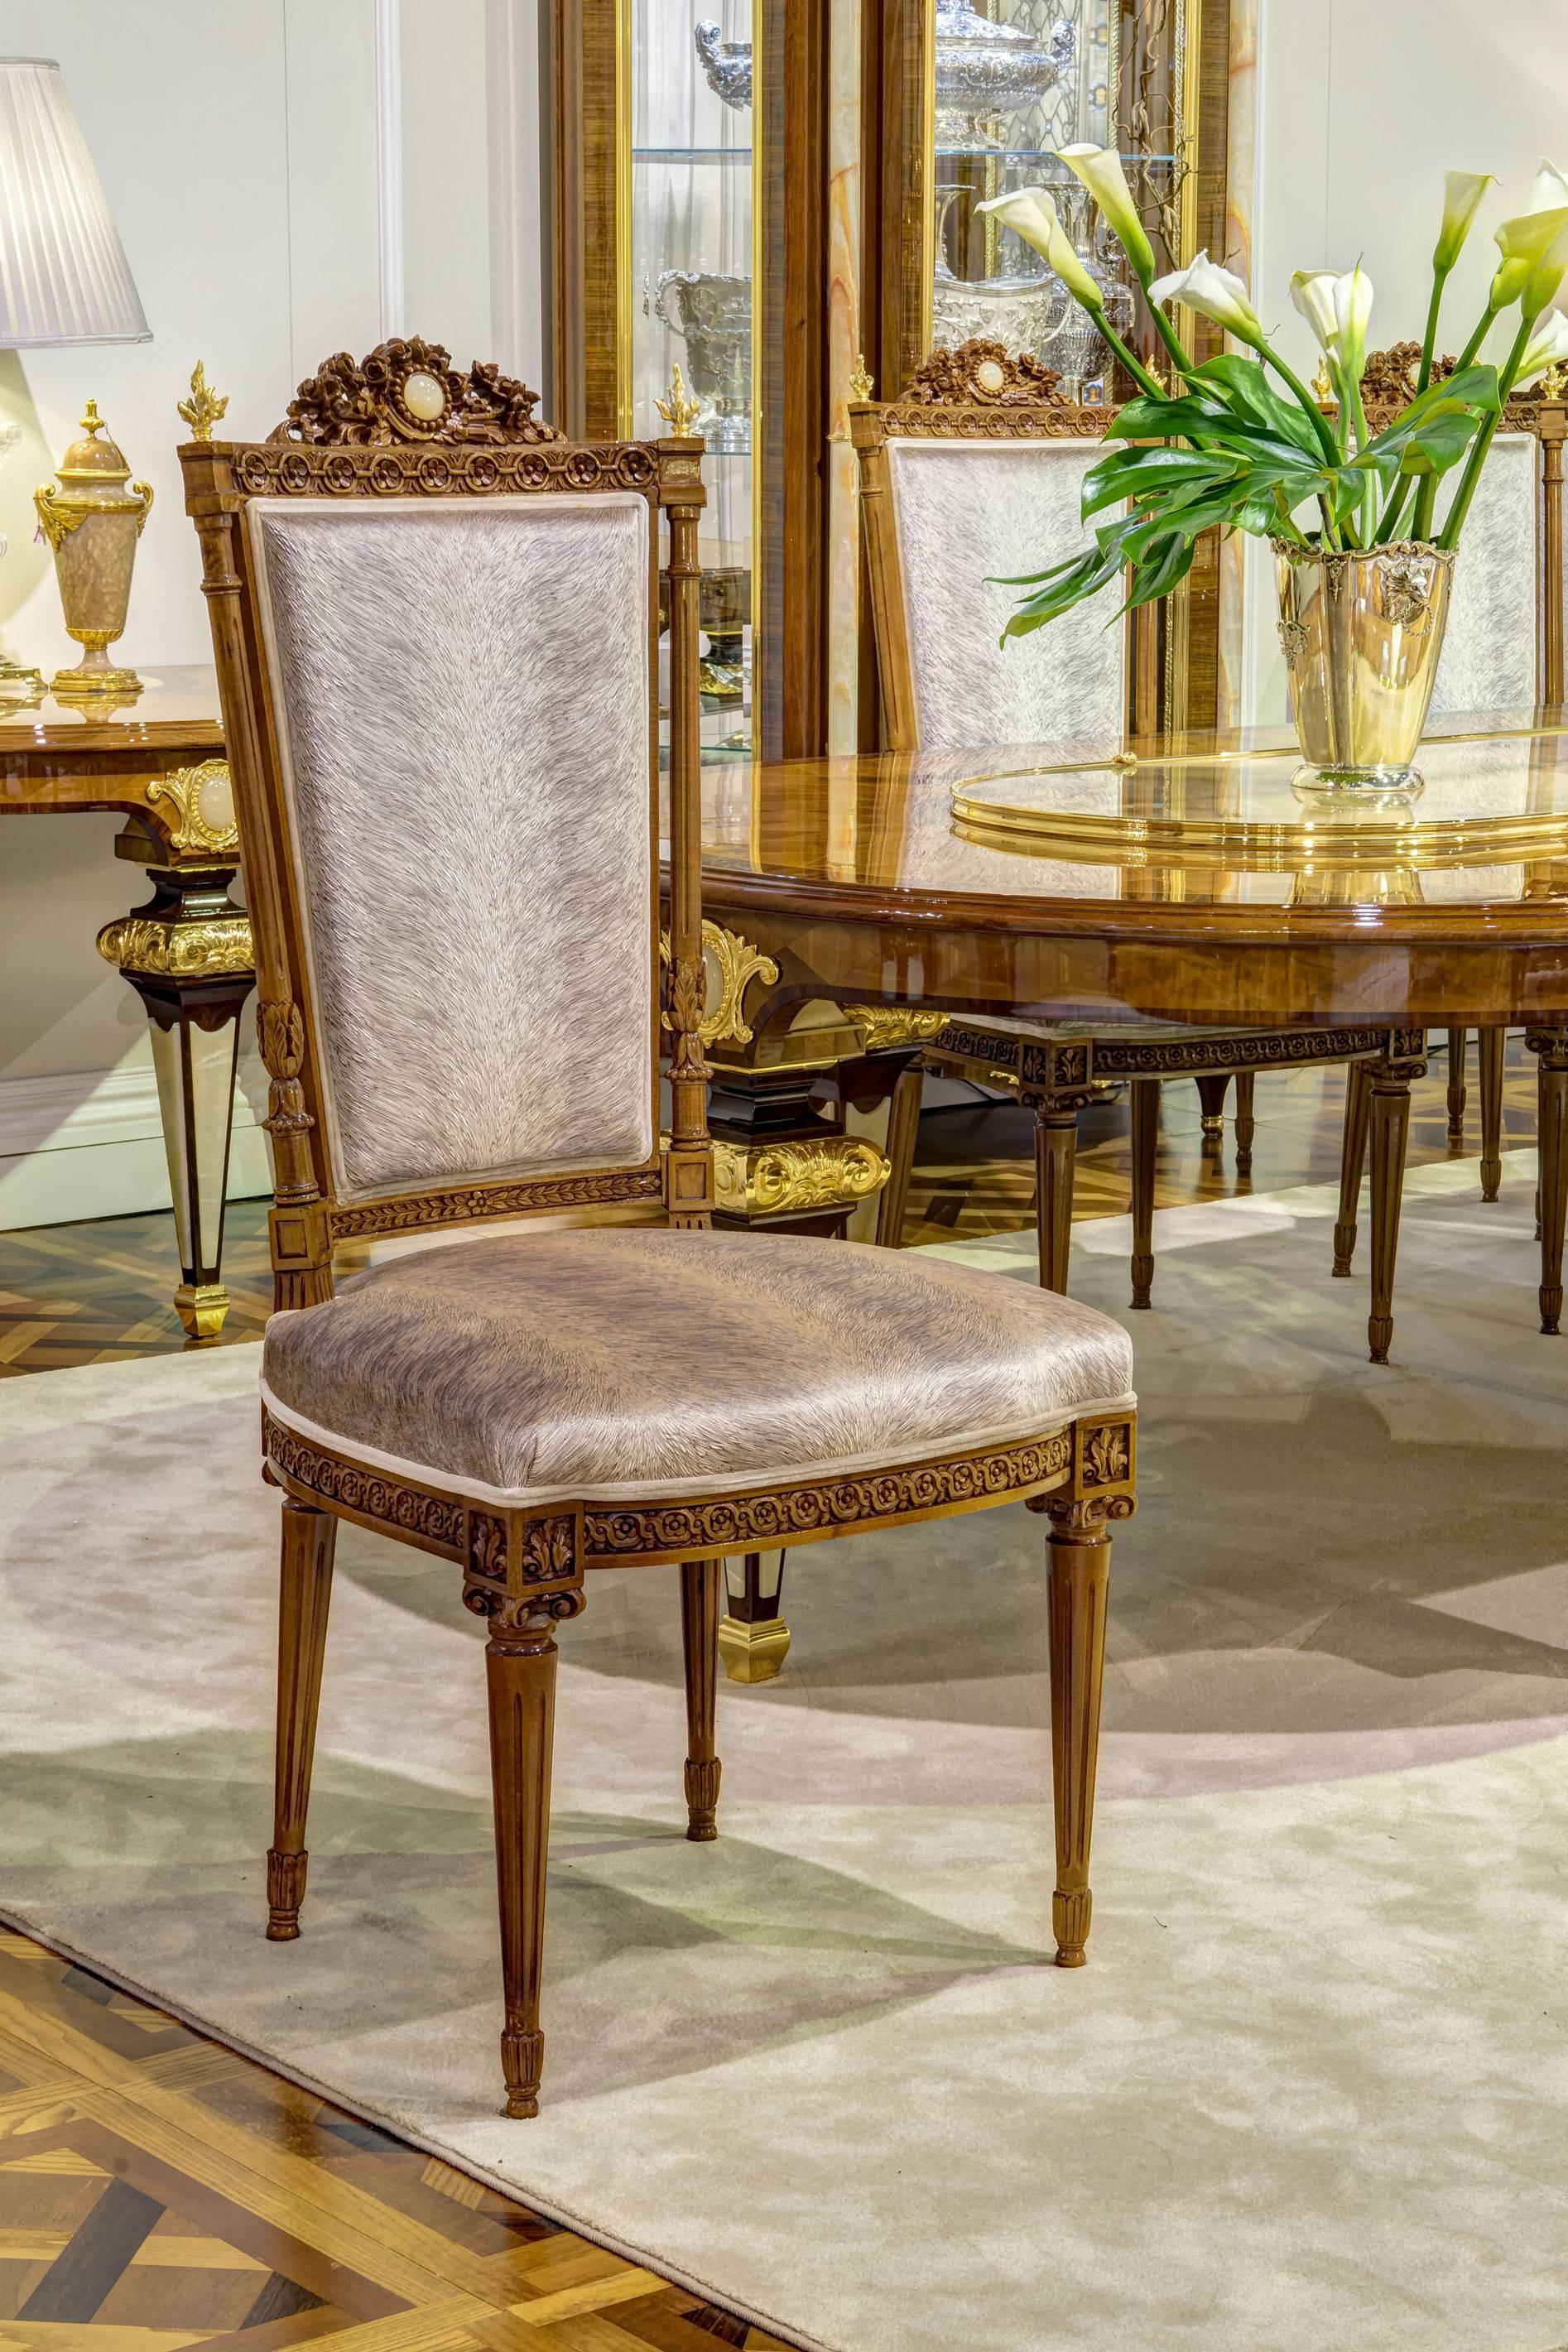 ART. 2069 – The elegance of luxury classic Chairs made in Italy by C.G. Capelletti.